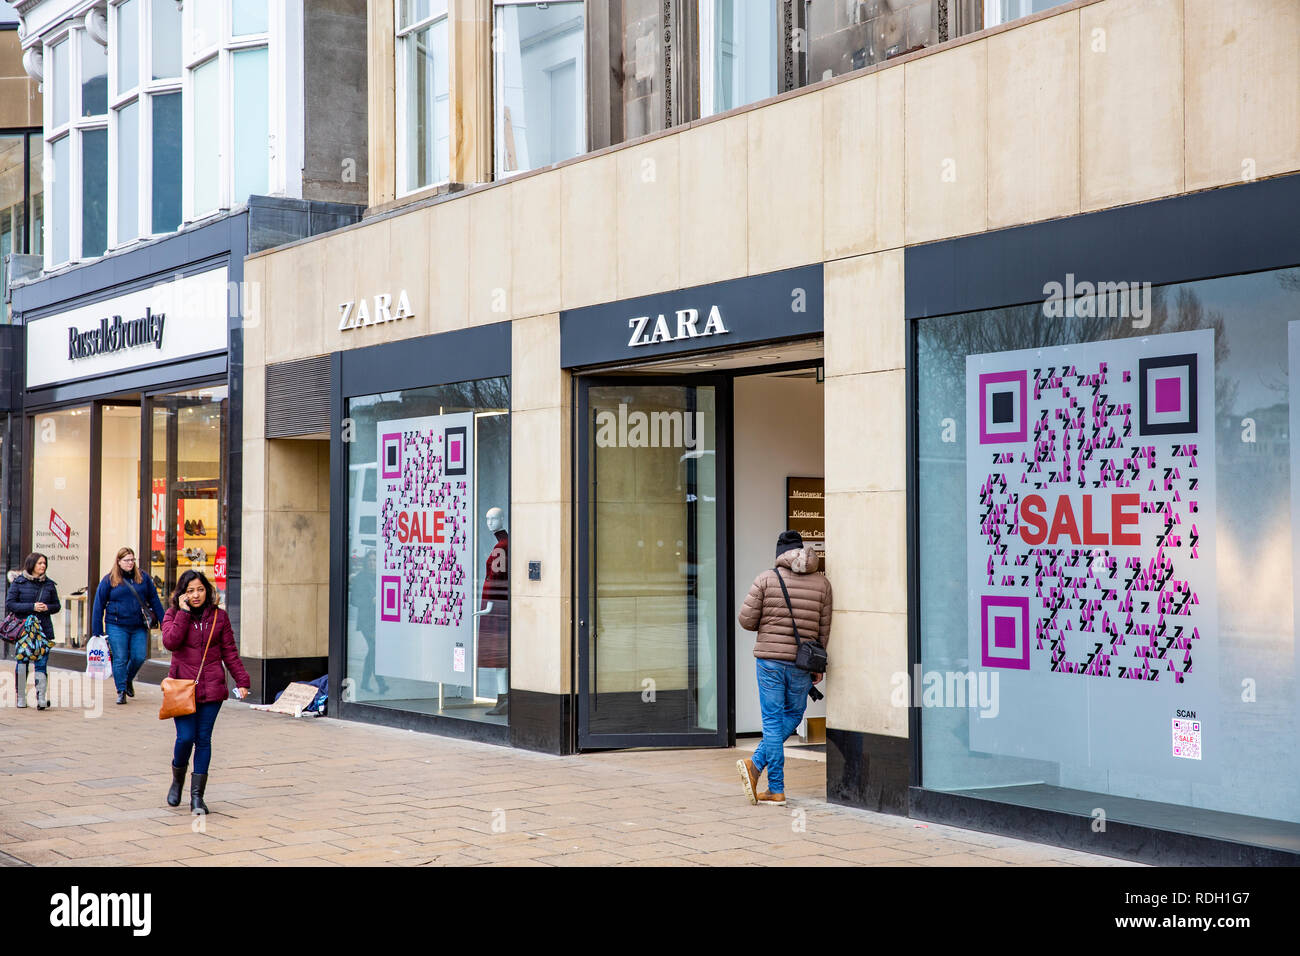 Zara store and Russell and Bromley shoe shop in Princes street,Edinburgh,Scotland,UK  Stock Photo - Alamy